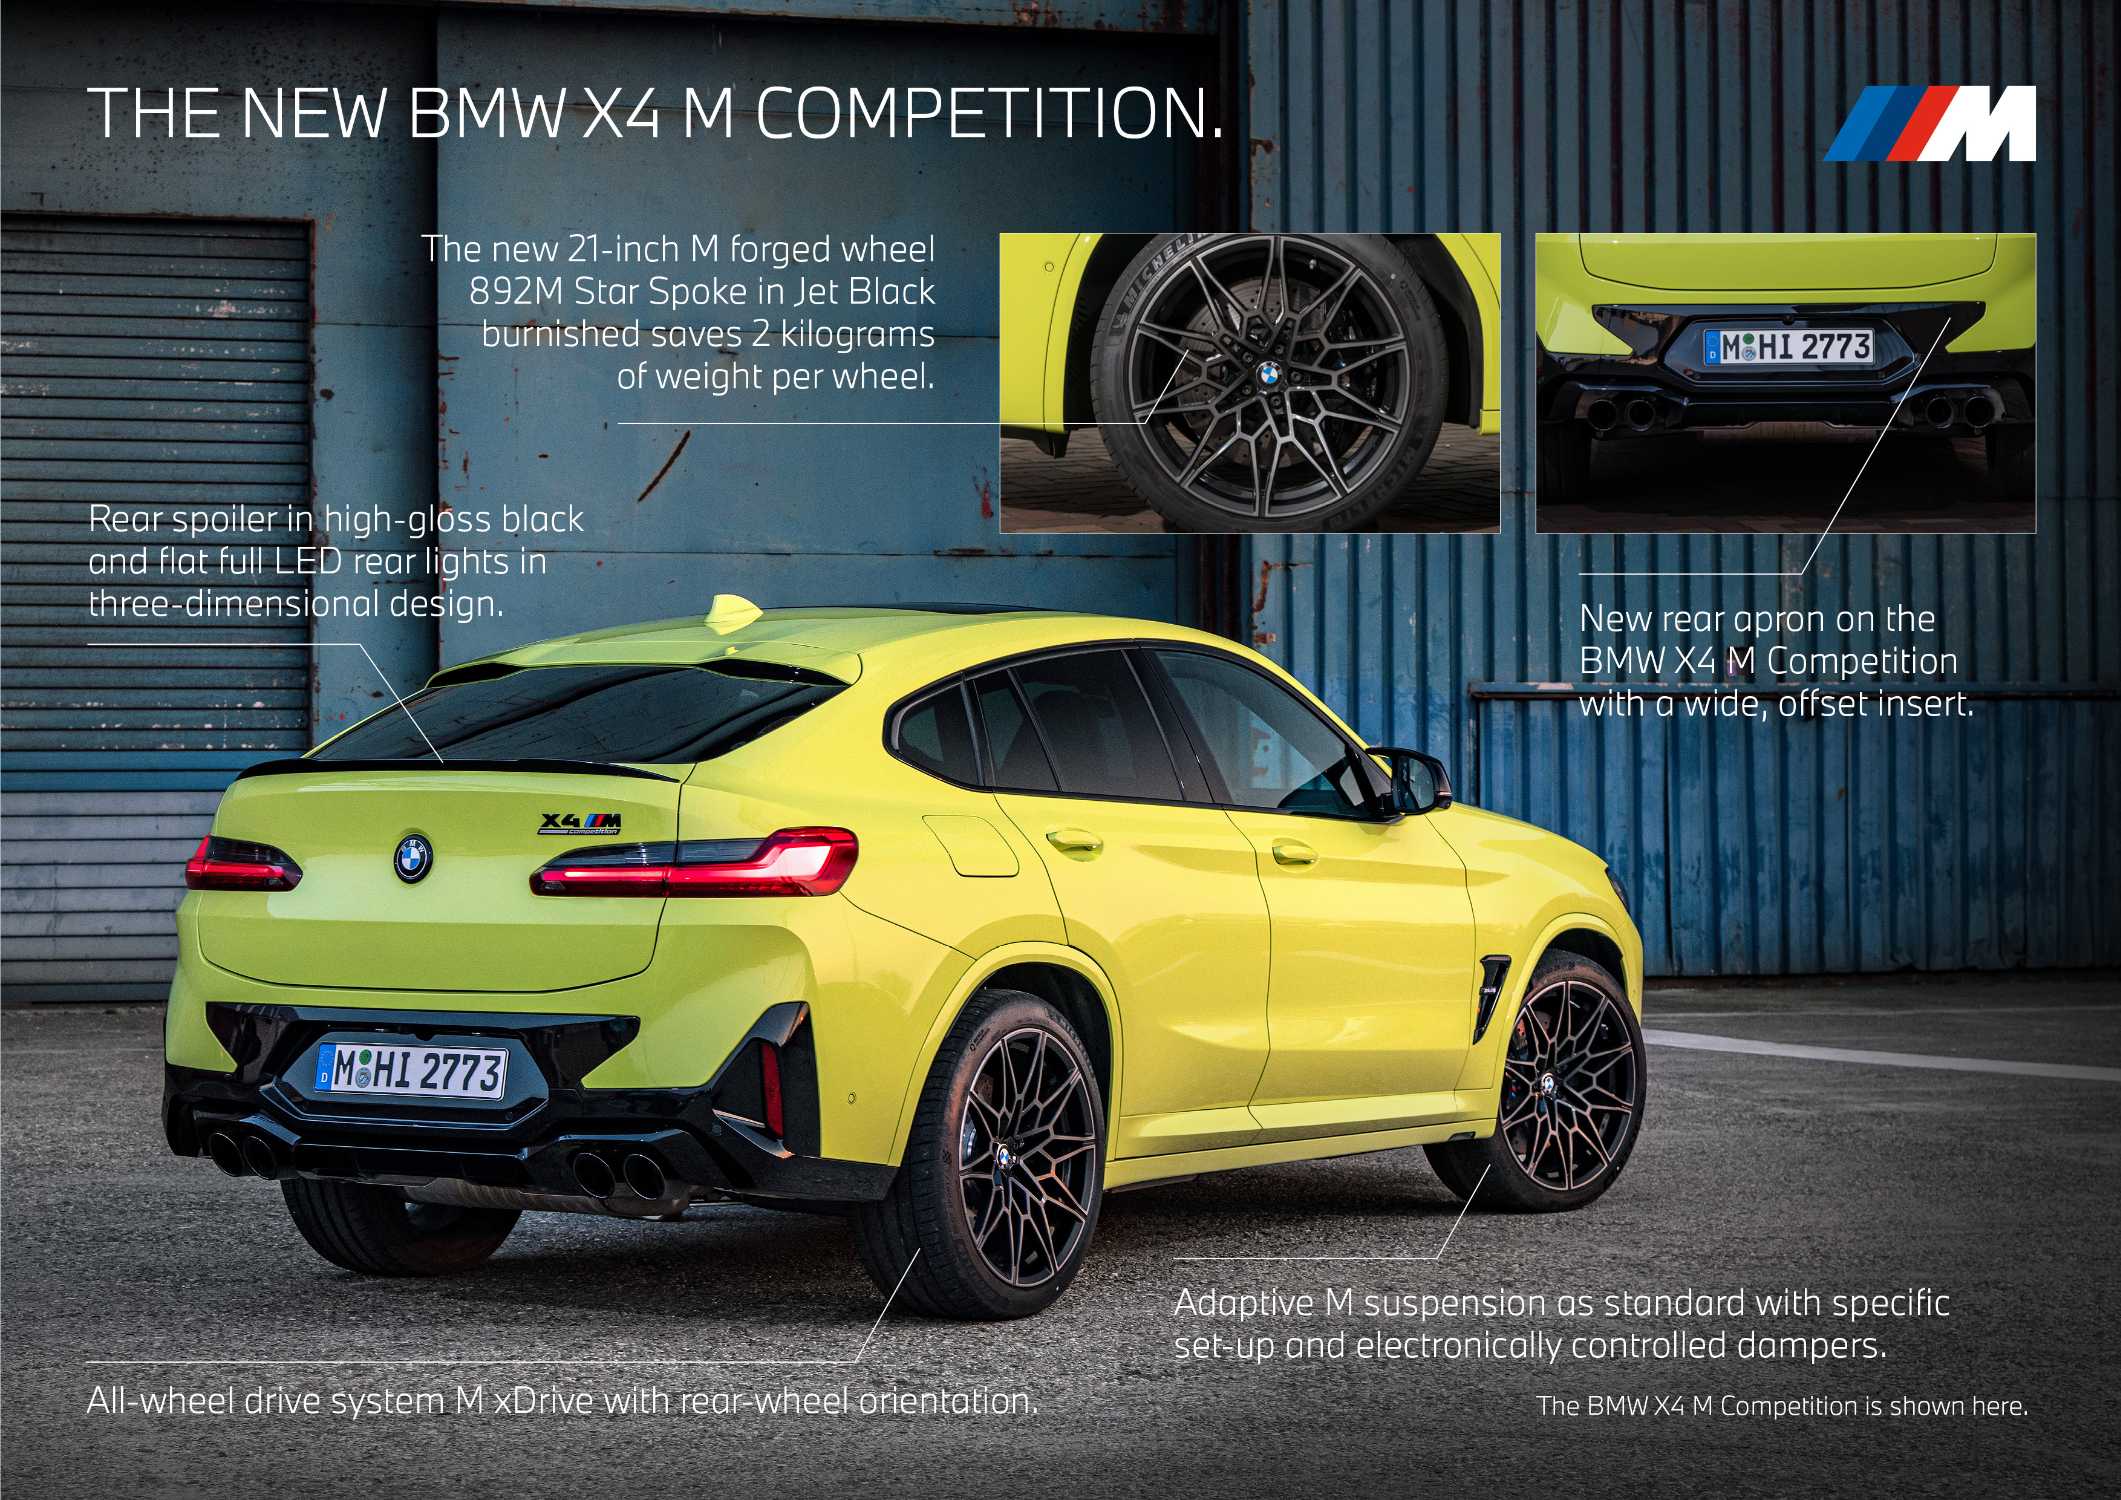 The new BMW X3 M Competition and the new BMW X4 M Competition (06/2021).